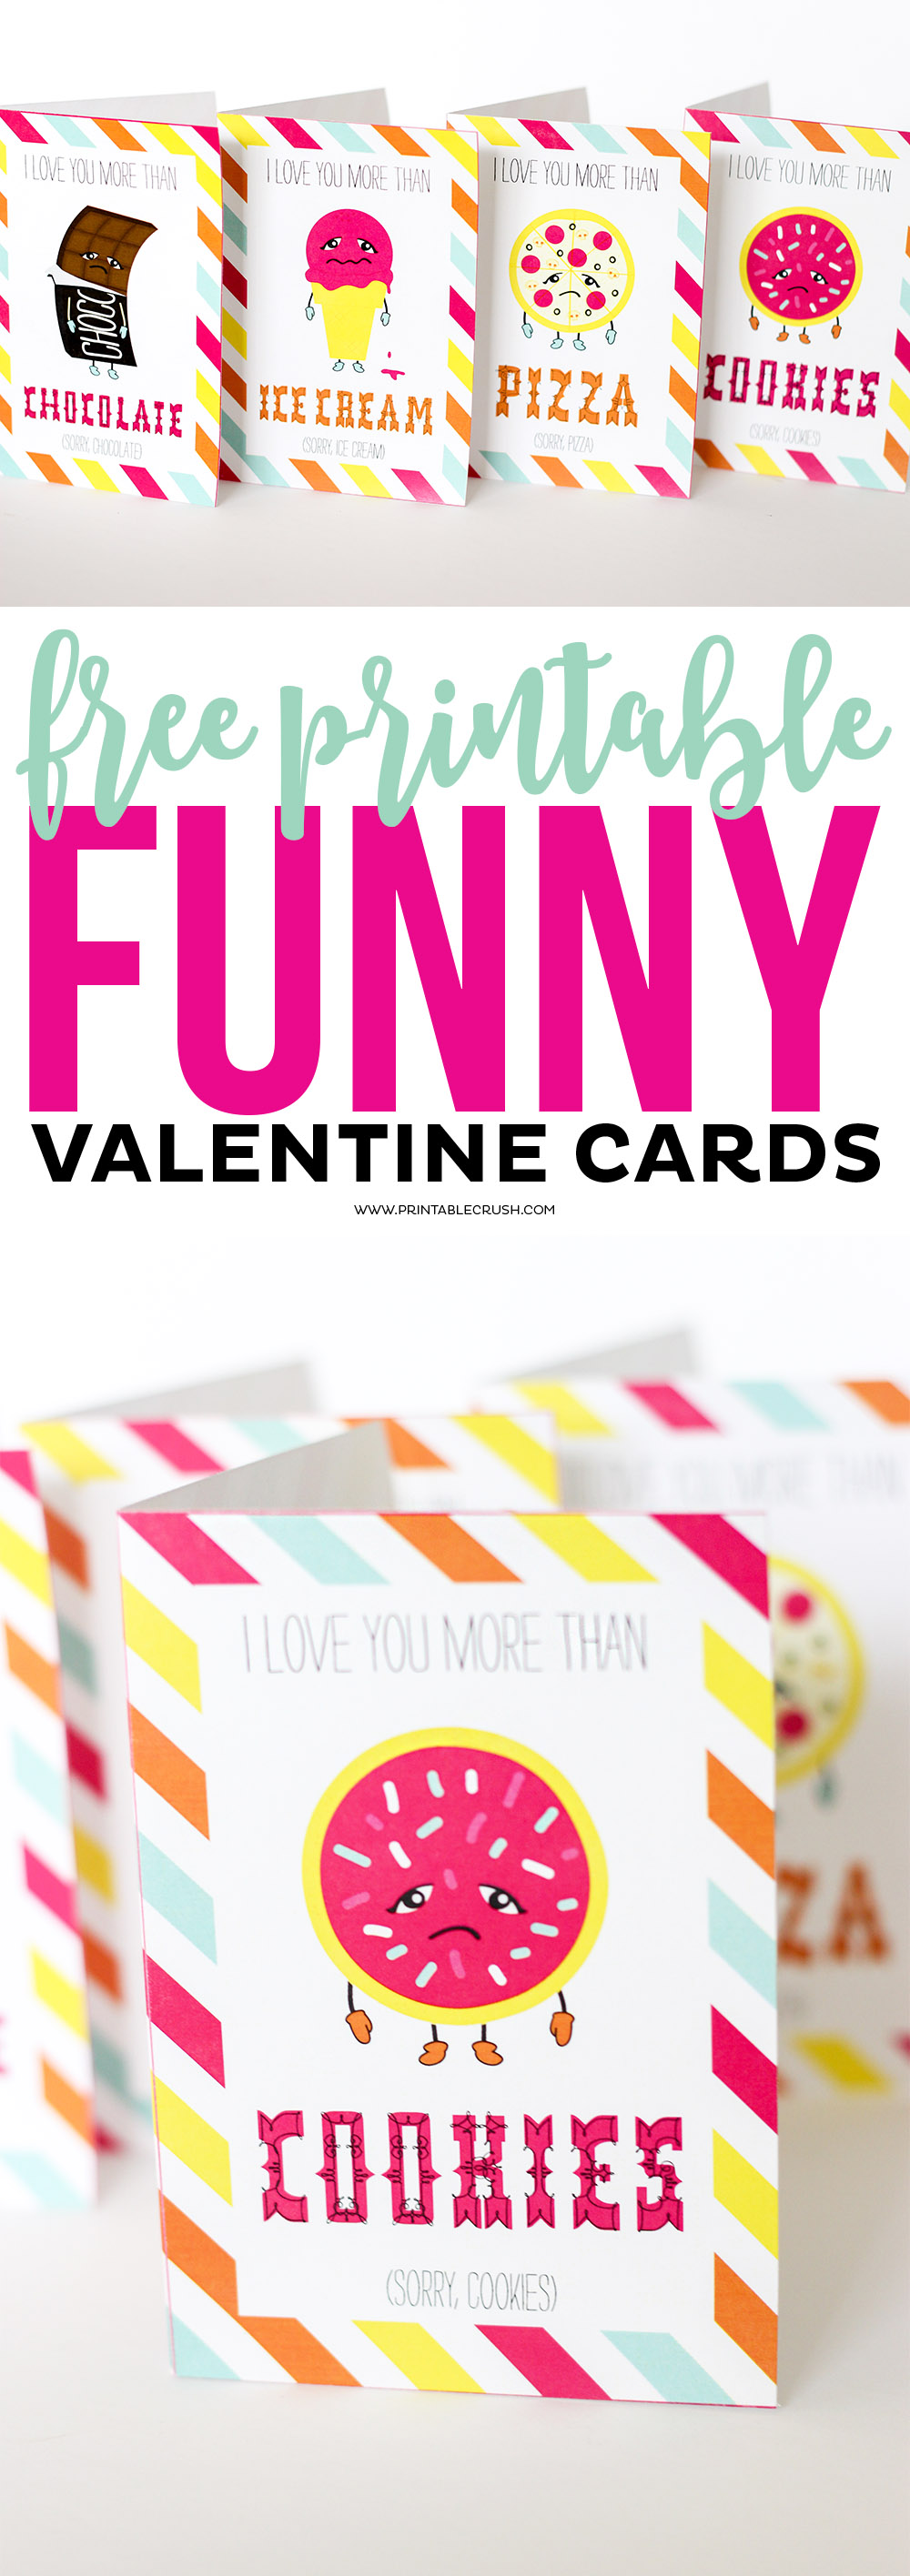 http://printablecrush.com/wp-content/uploads/2017/01/Free-Printable-Love-You-More-Than-Funny-Valentine-Cards-6-copy.jpg